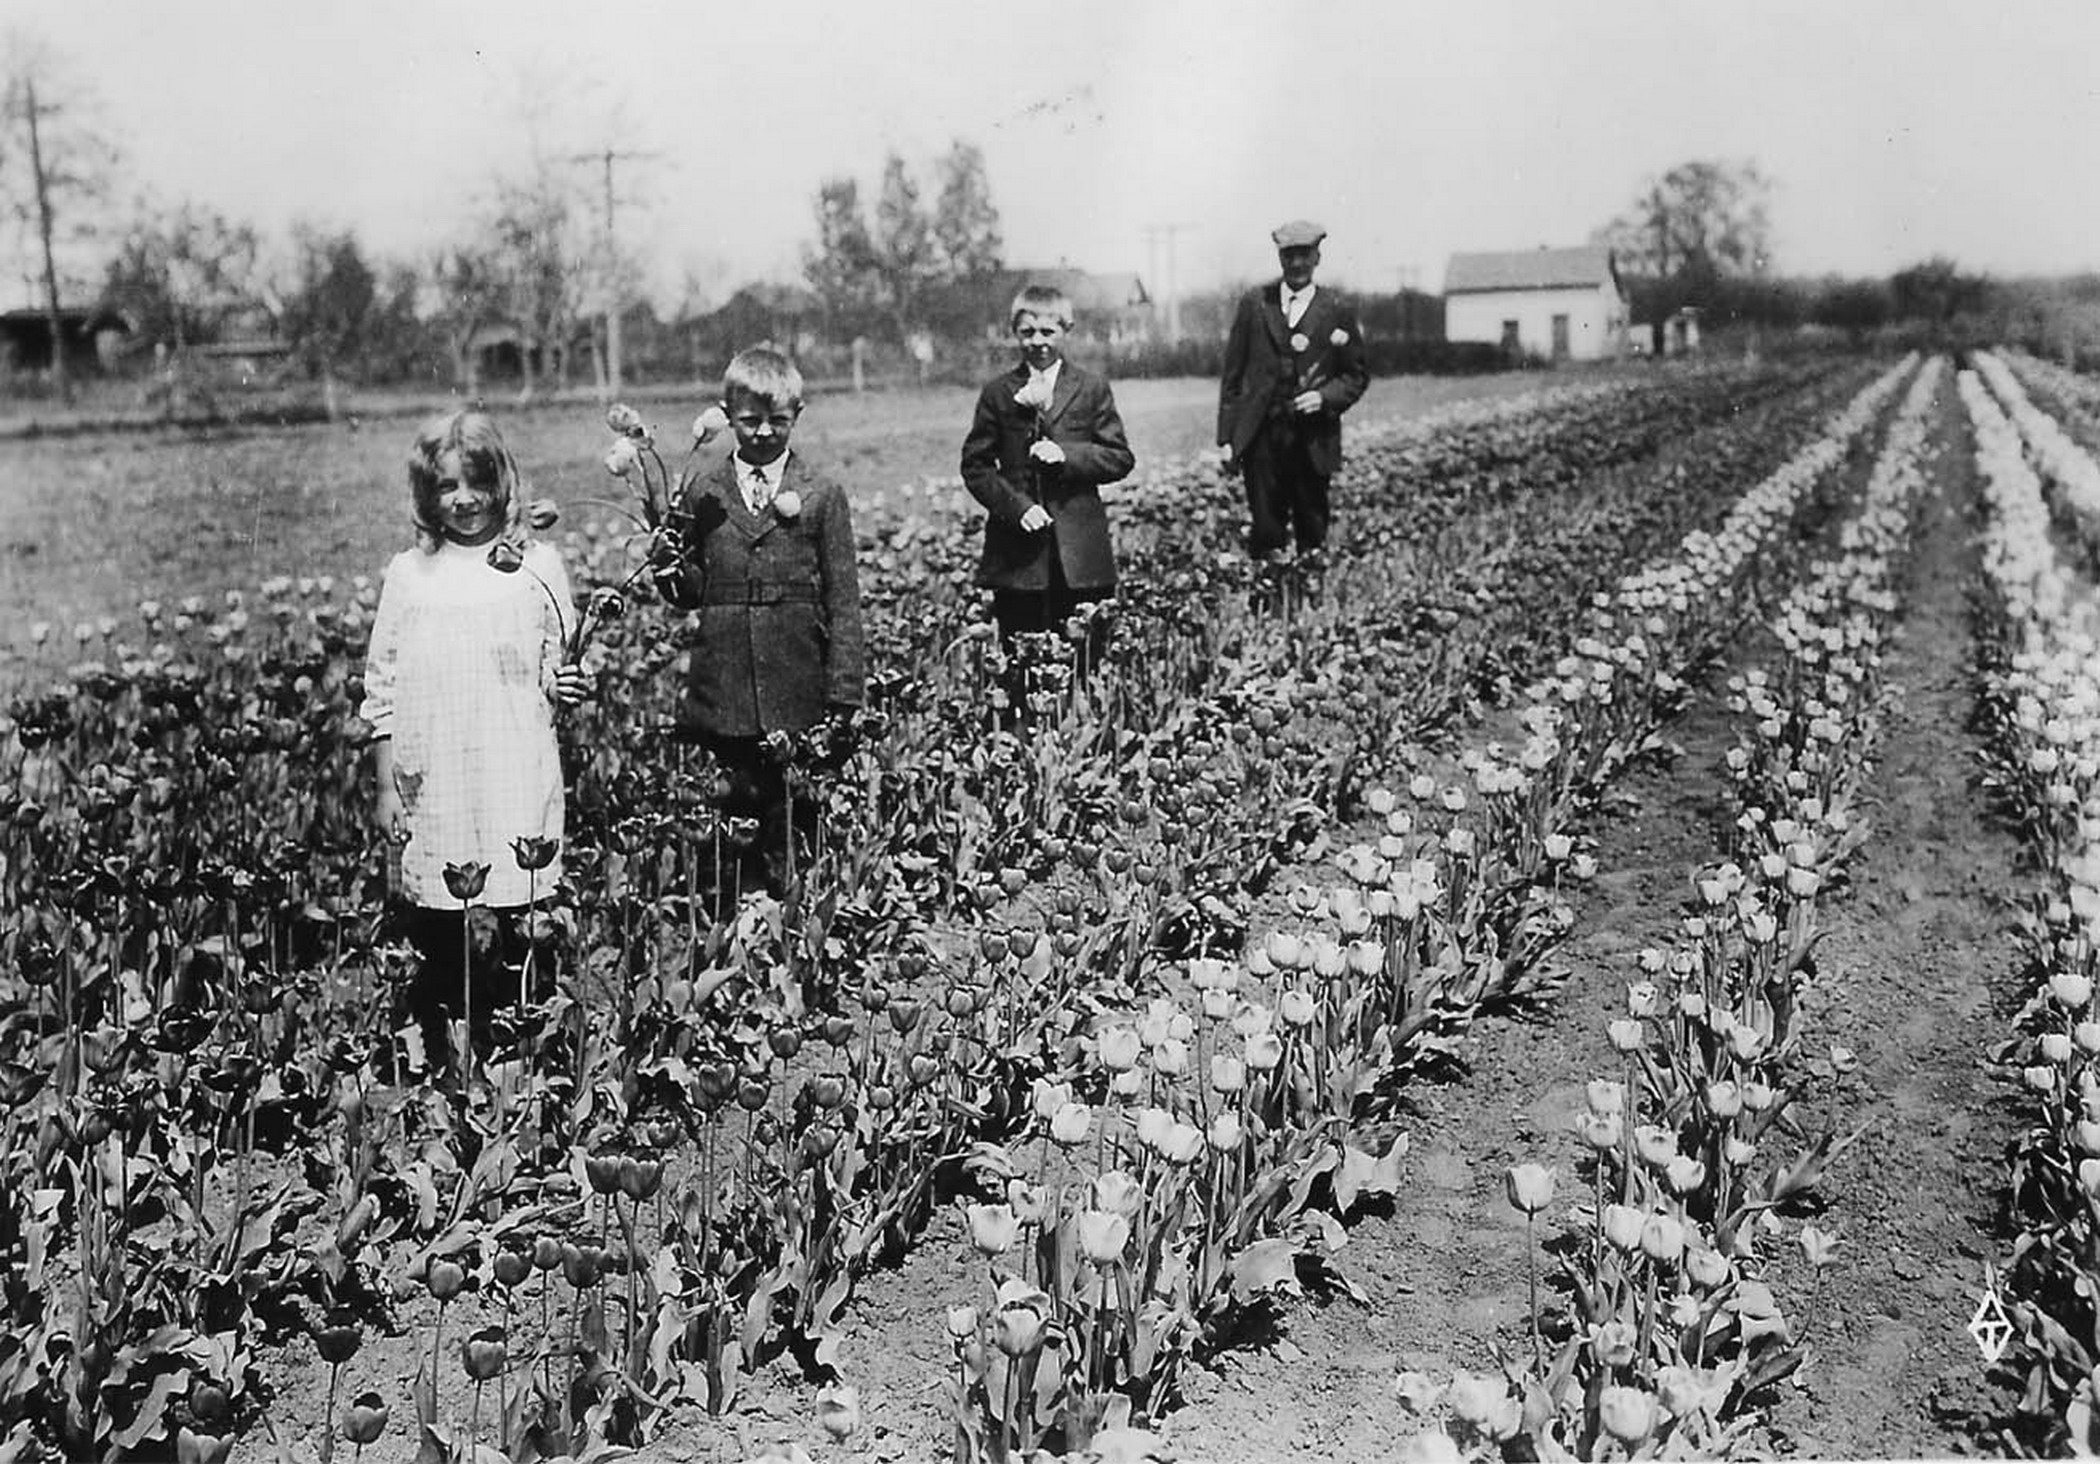 Three children and a man in early 20th century clothing walk through rows of tulips. Two of the children, a boy and a girl, hold tulips in hand. The man in the back has a tulip in the lapel of his dark coat. Behind them a farmhouse is visible.